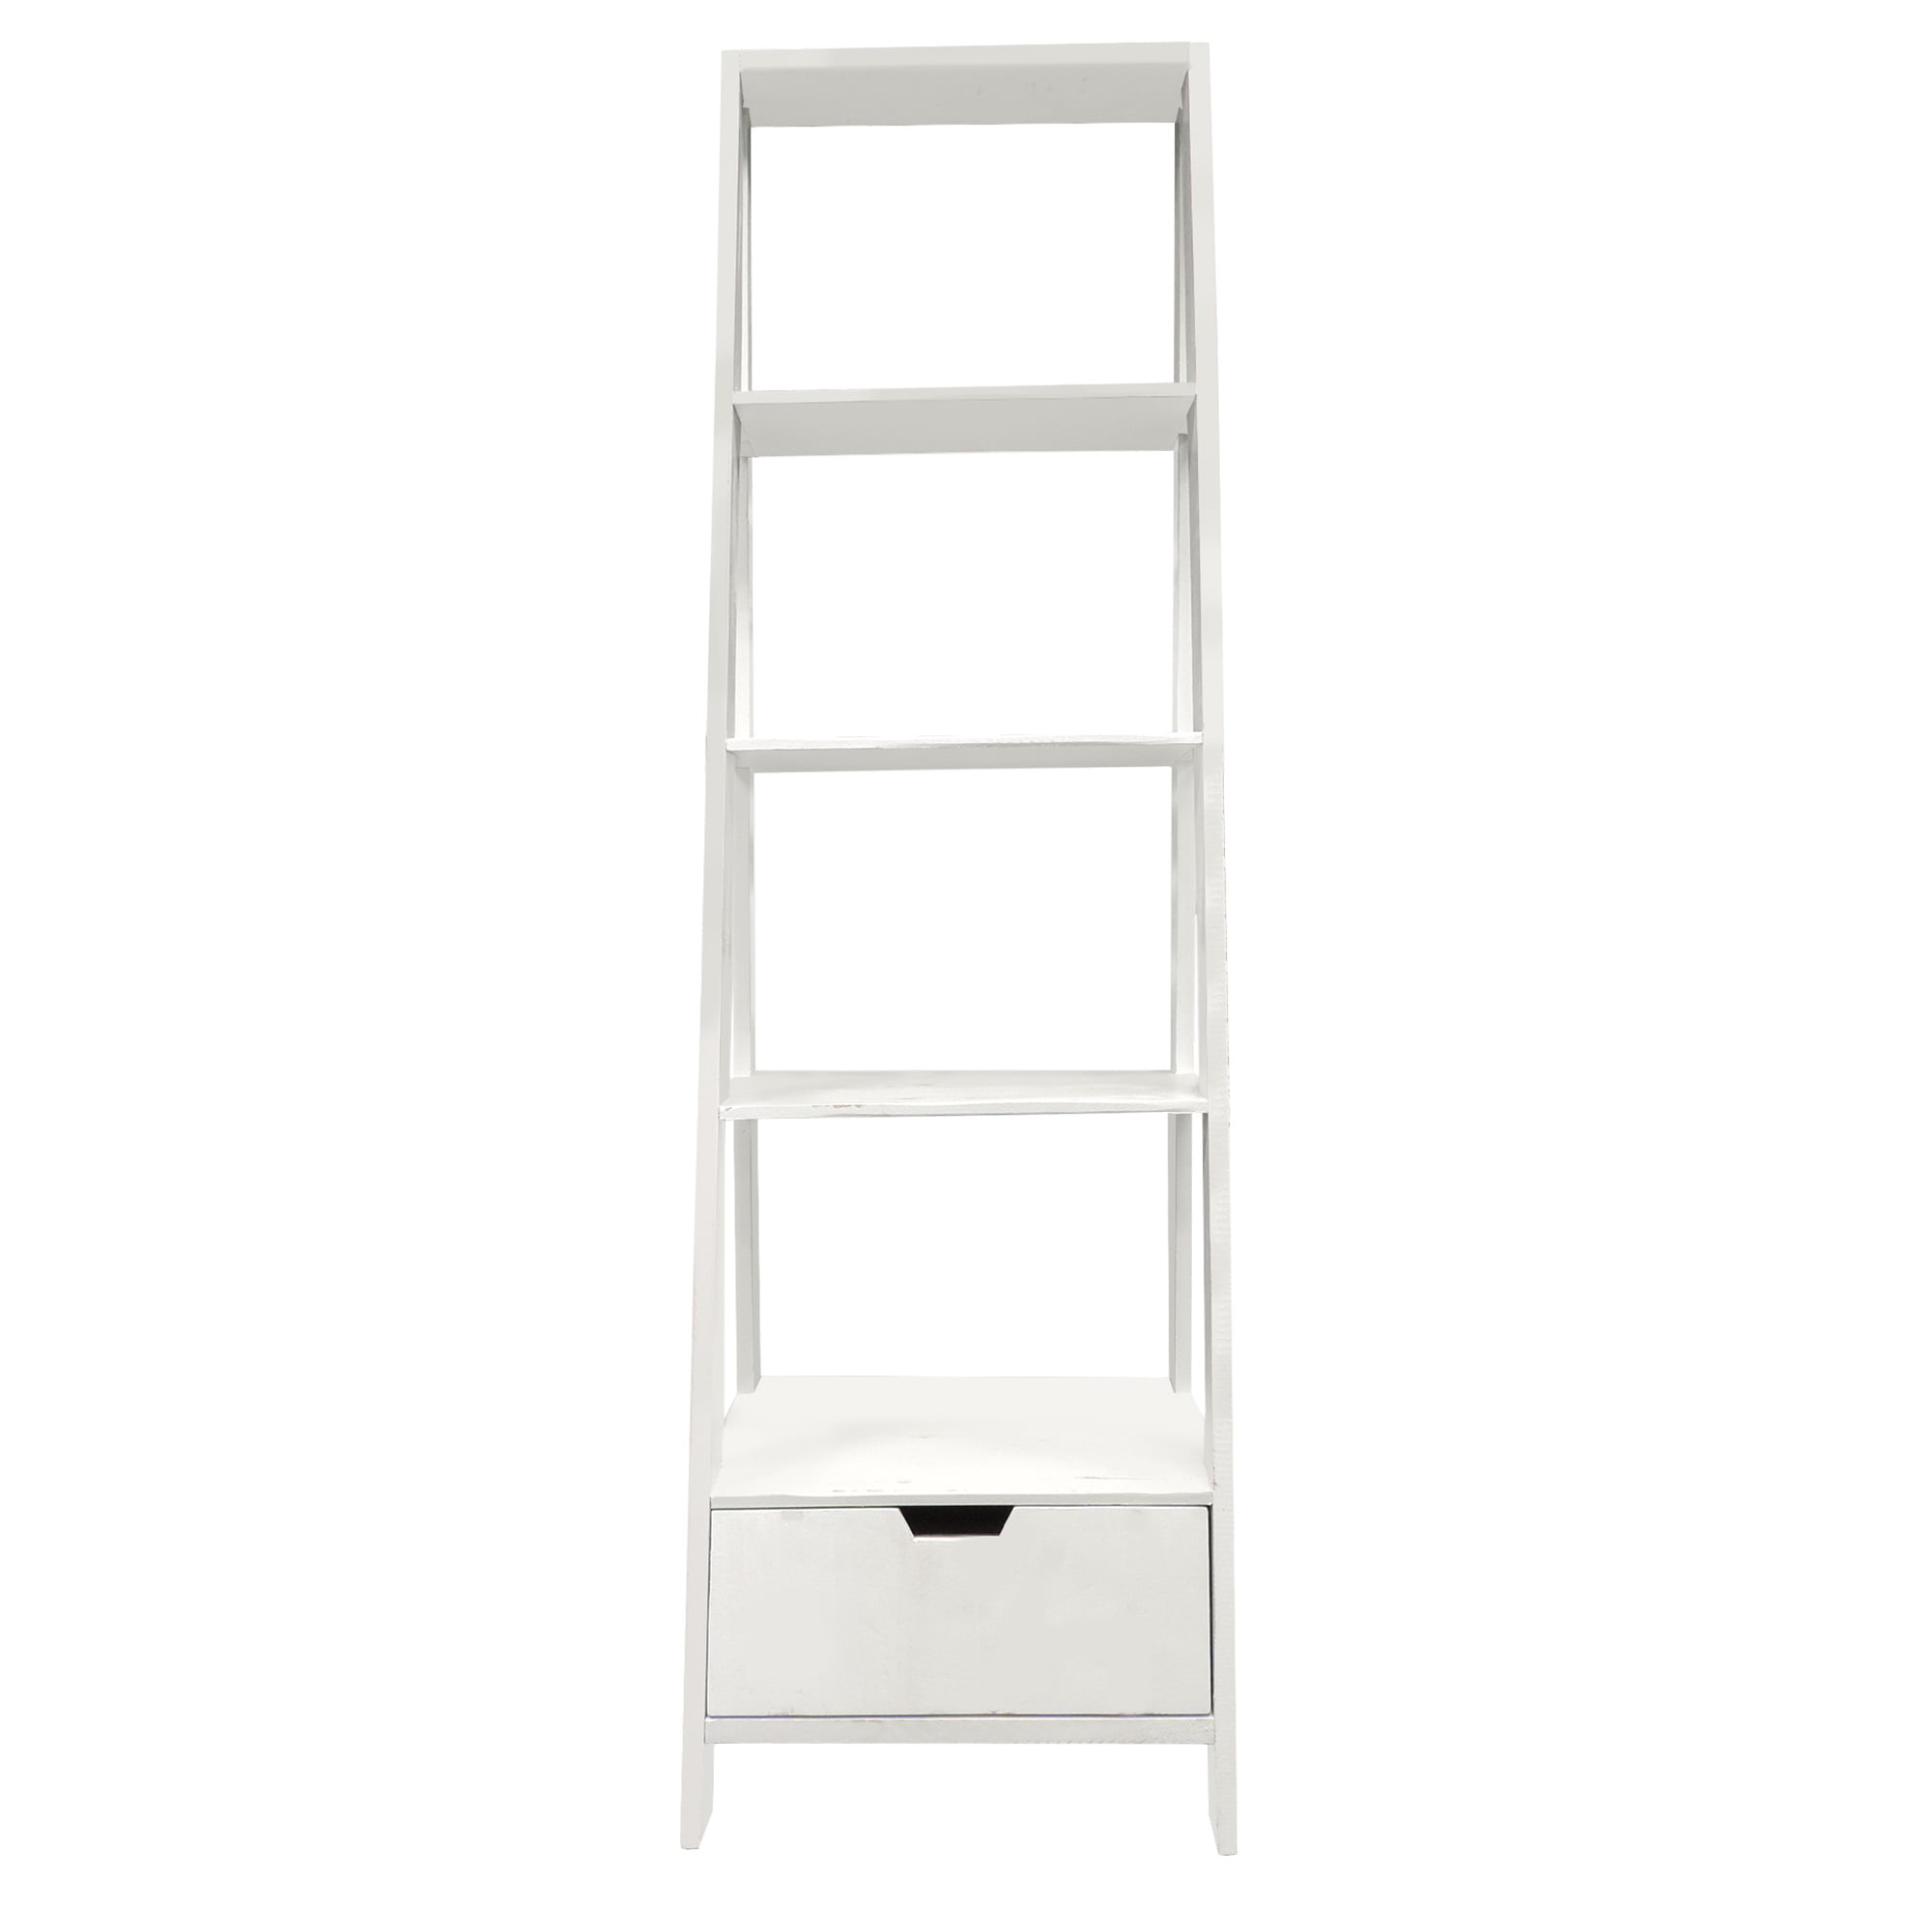 4 Shelf Wooden Ladder Bookcase With, White Bookcase With Drawers On Bottom